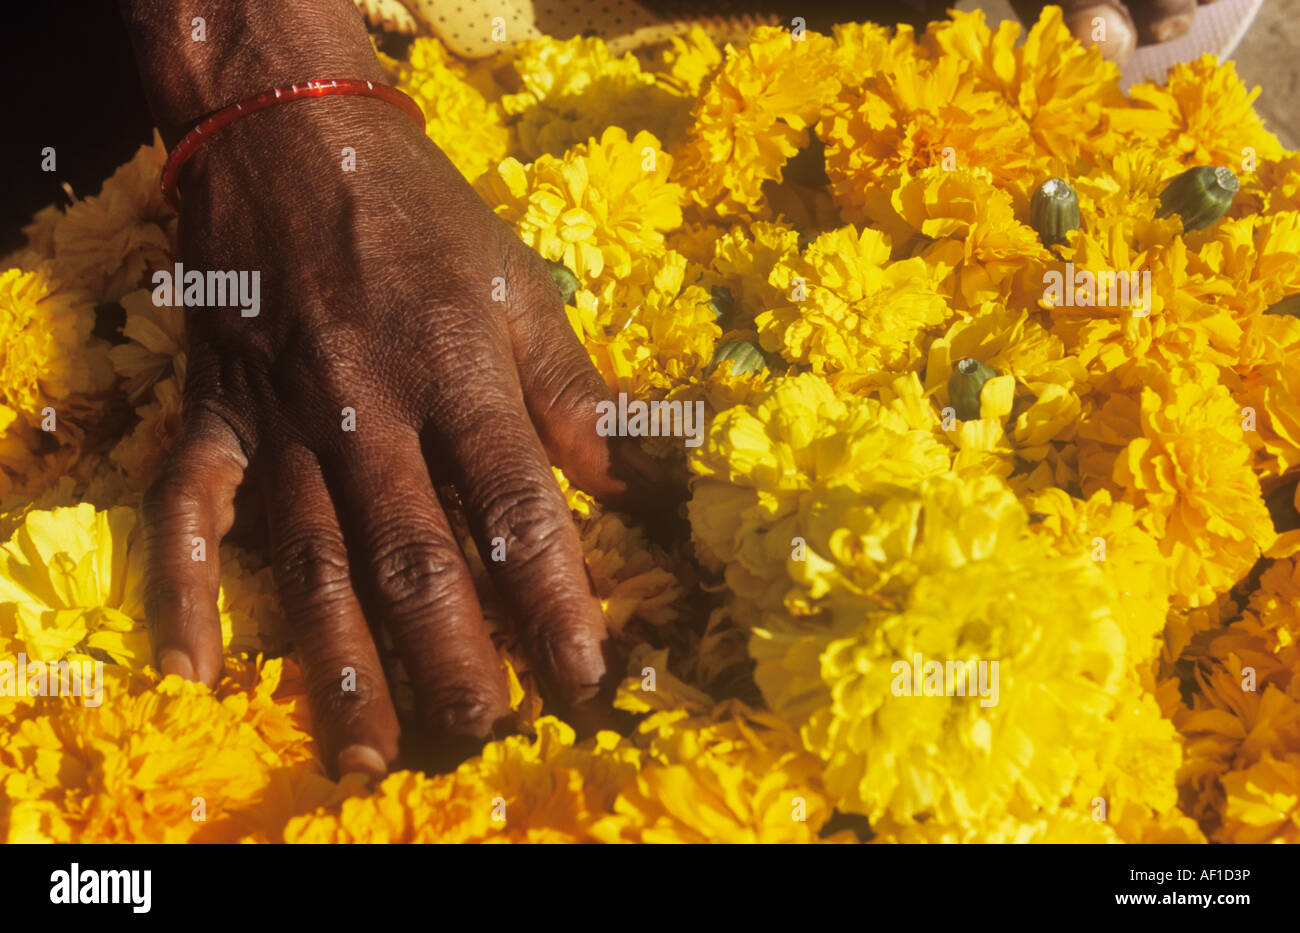 Hand rests on marigold flowers for sale at a market in India. Stock Photo